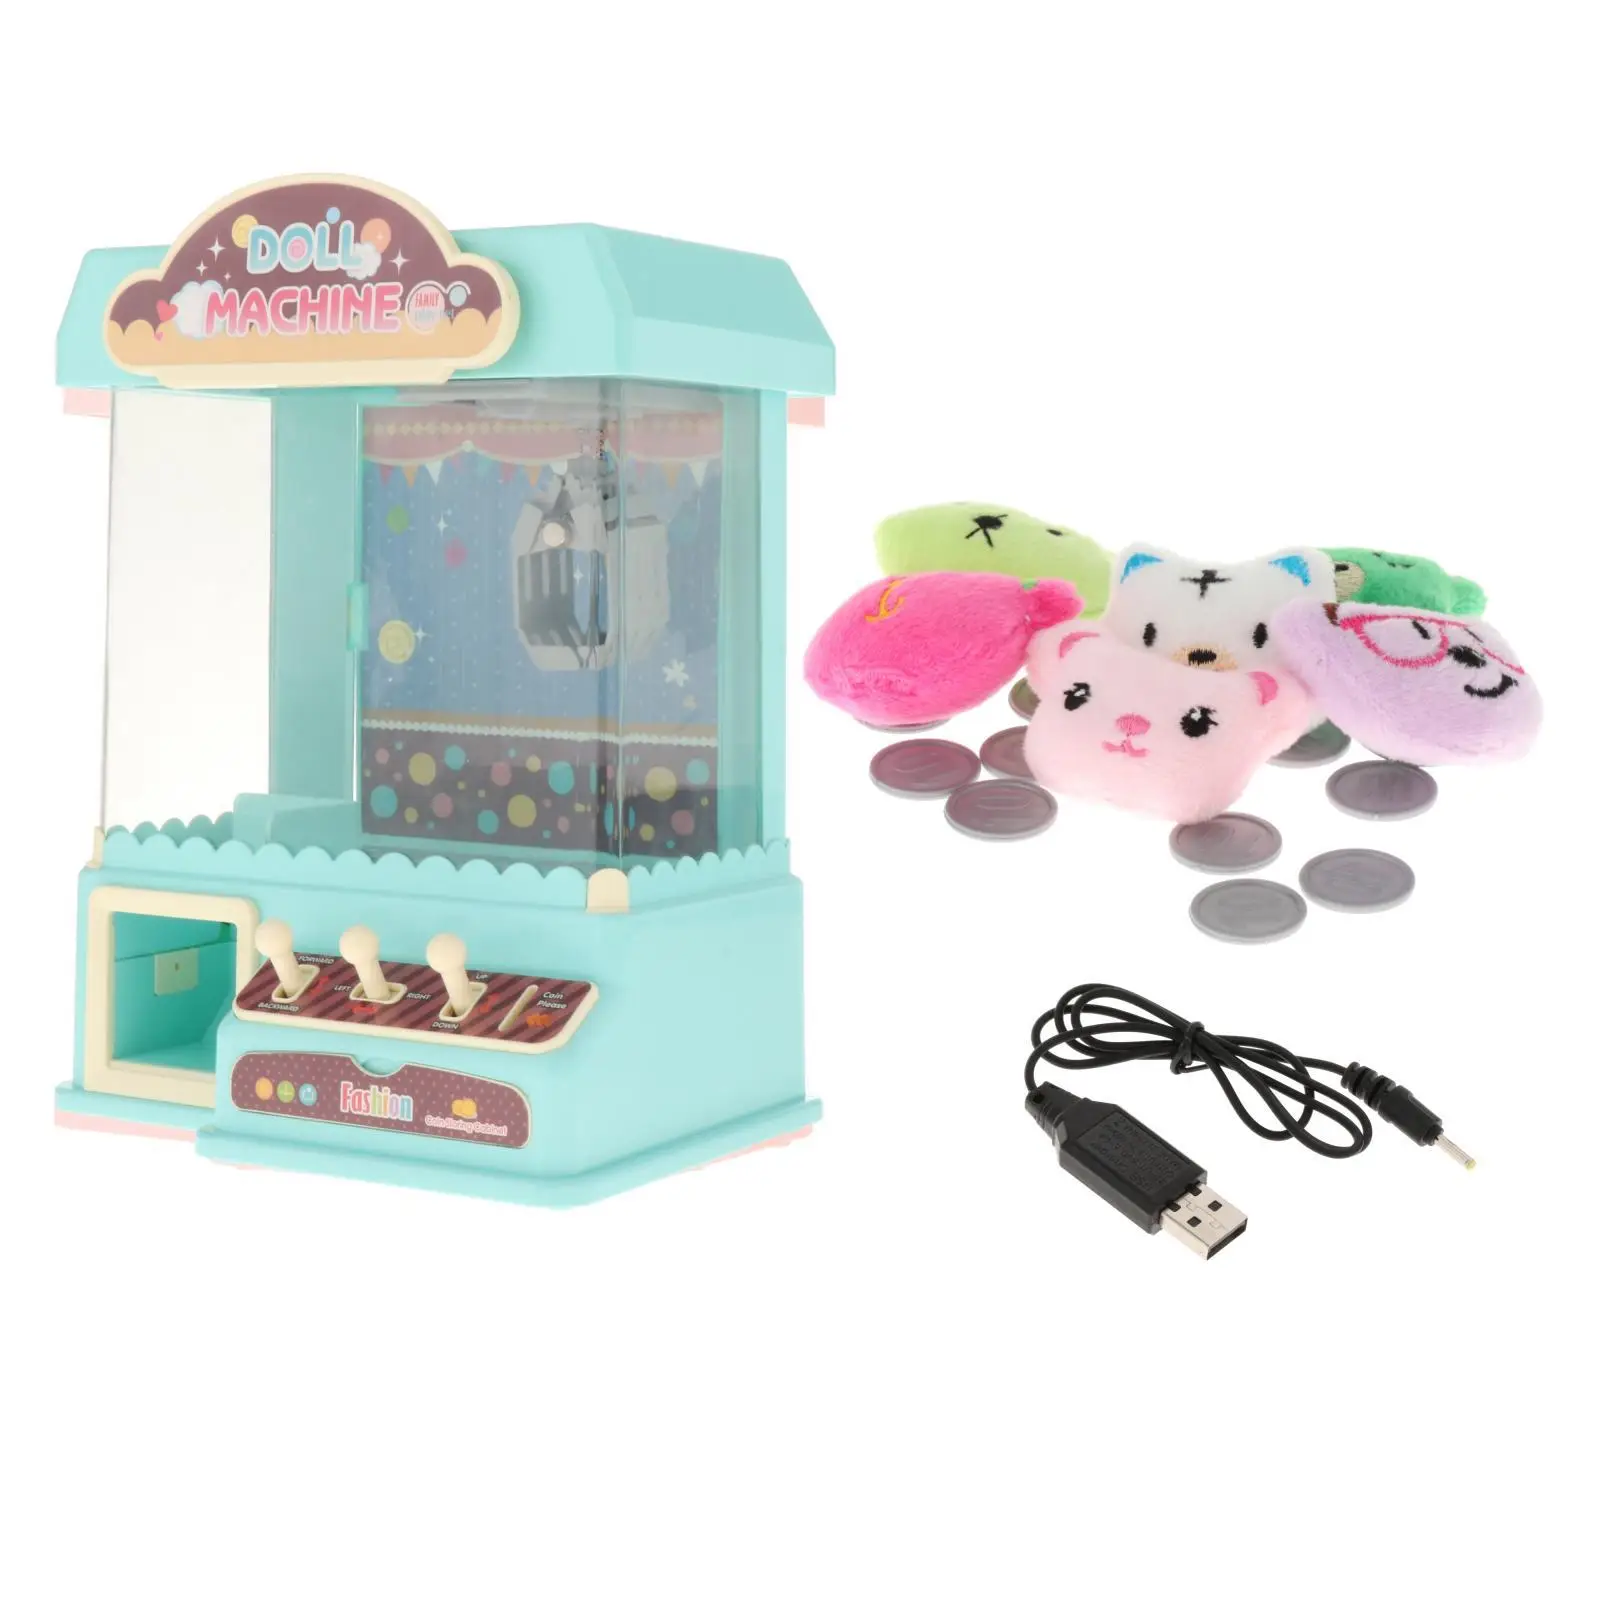 Rechargeable Manual Claw Machine Toy House Dollhouse Gifts for Kids